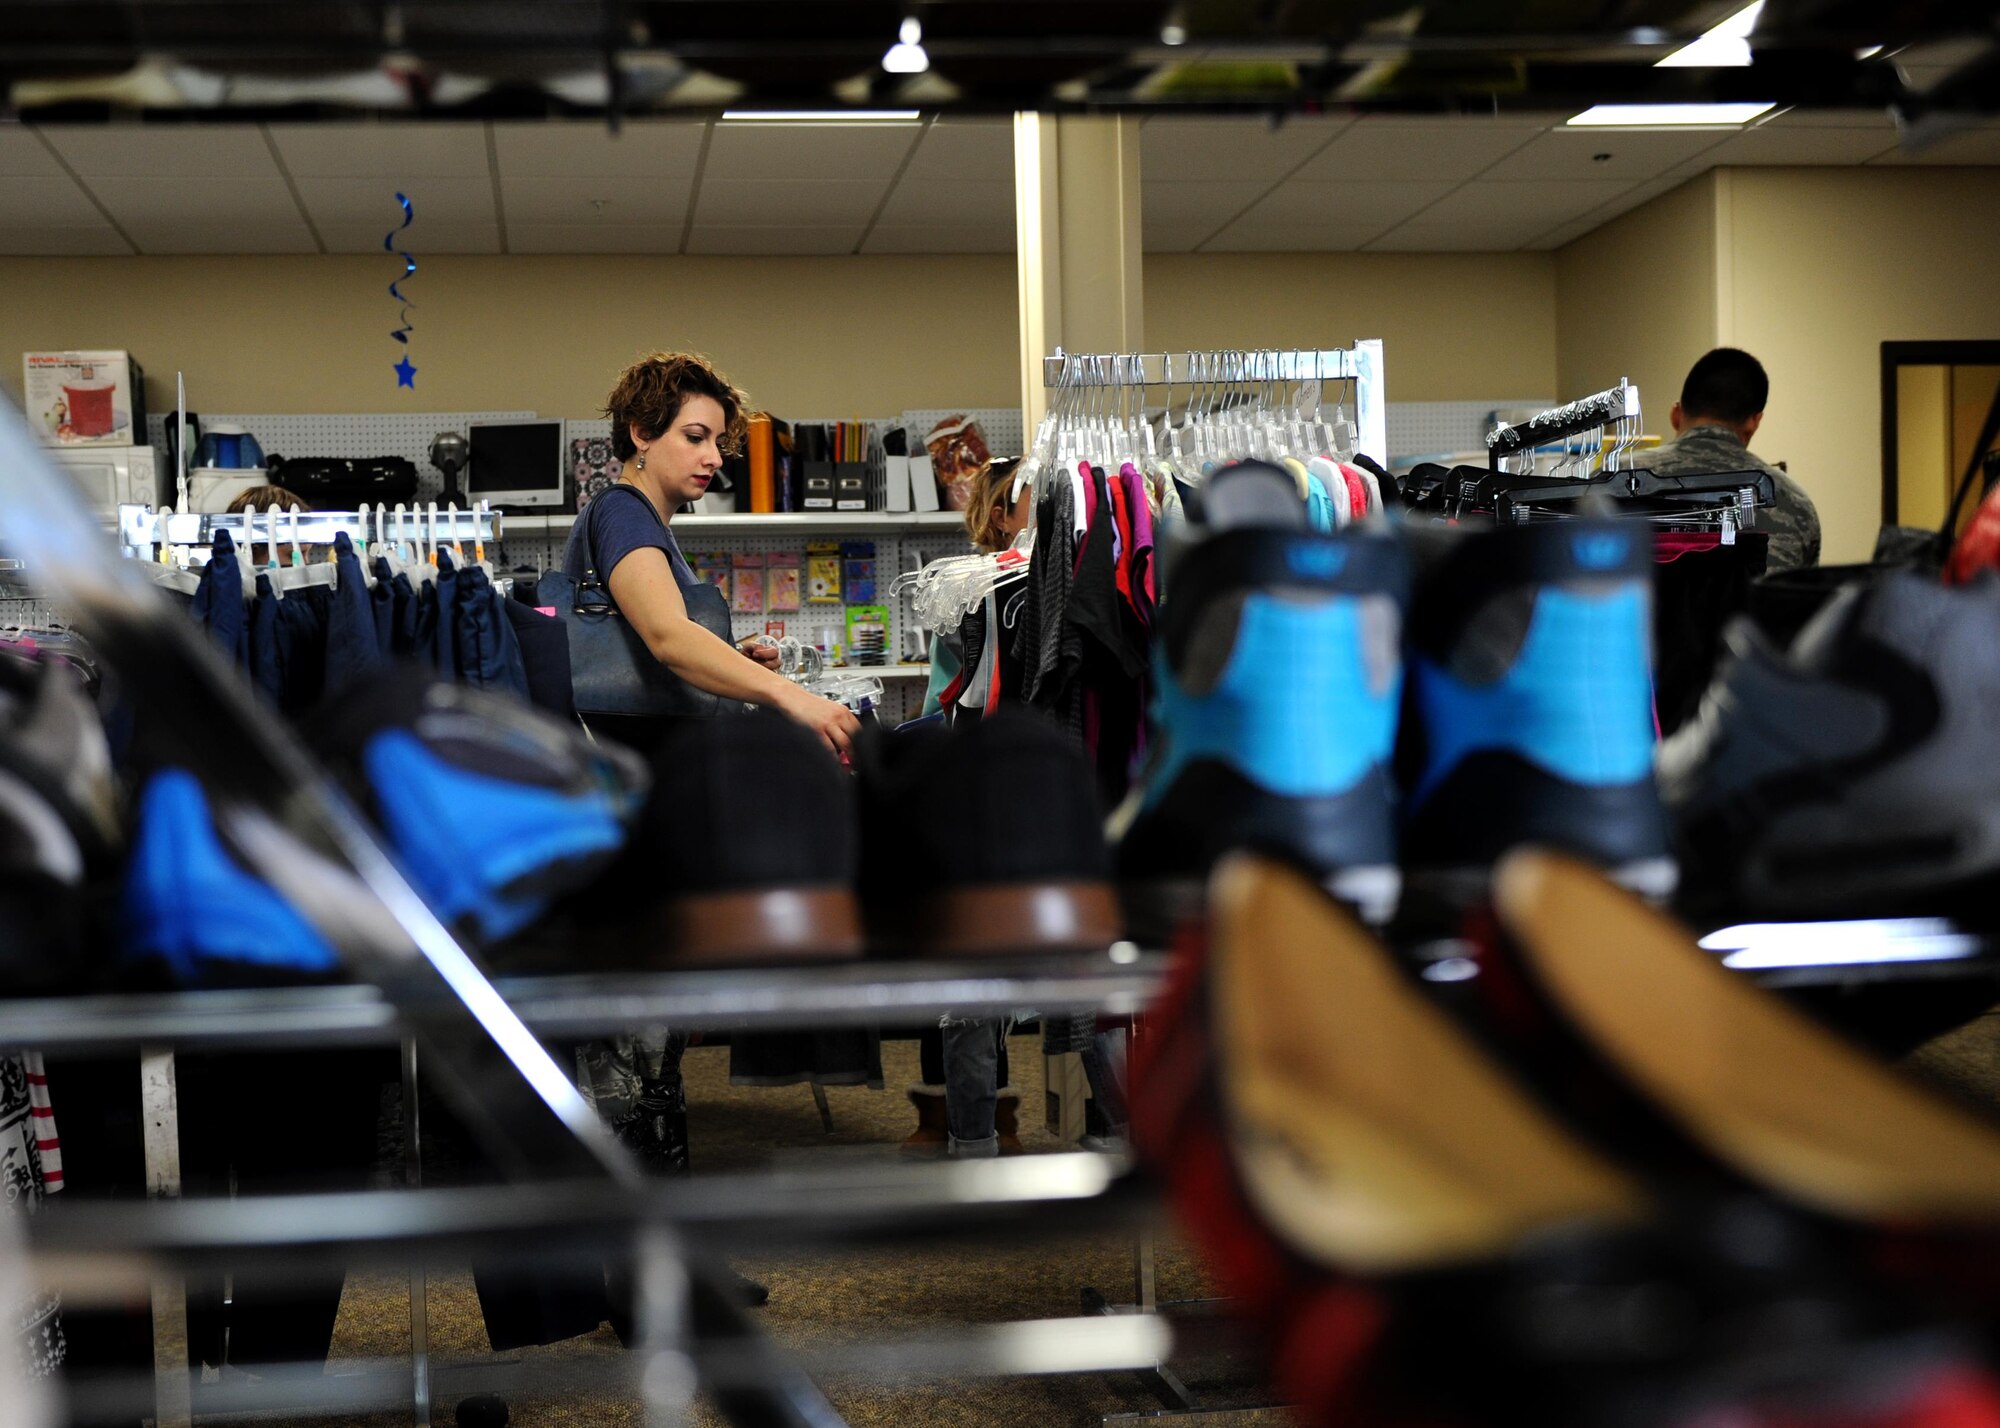 Customers browse for clothes and other items March 7, 2017, at the Airman’s Attic on Little Rock Air Force Base, Ark. Families are encouraged to continue the cycle of giving, by donating items to ease the transition of moving for other families. (U.S. Air Force photo by Airman 1st Class Grace Nichols)